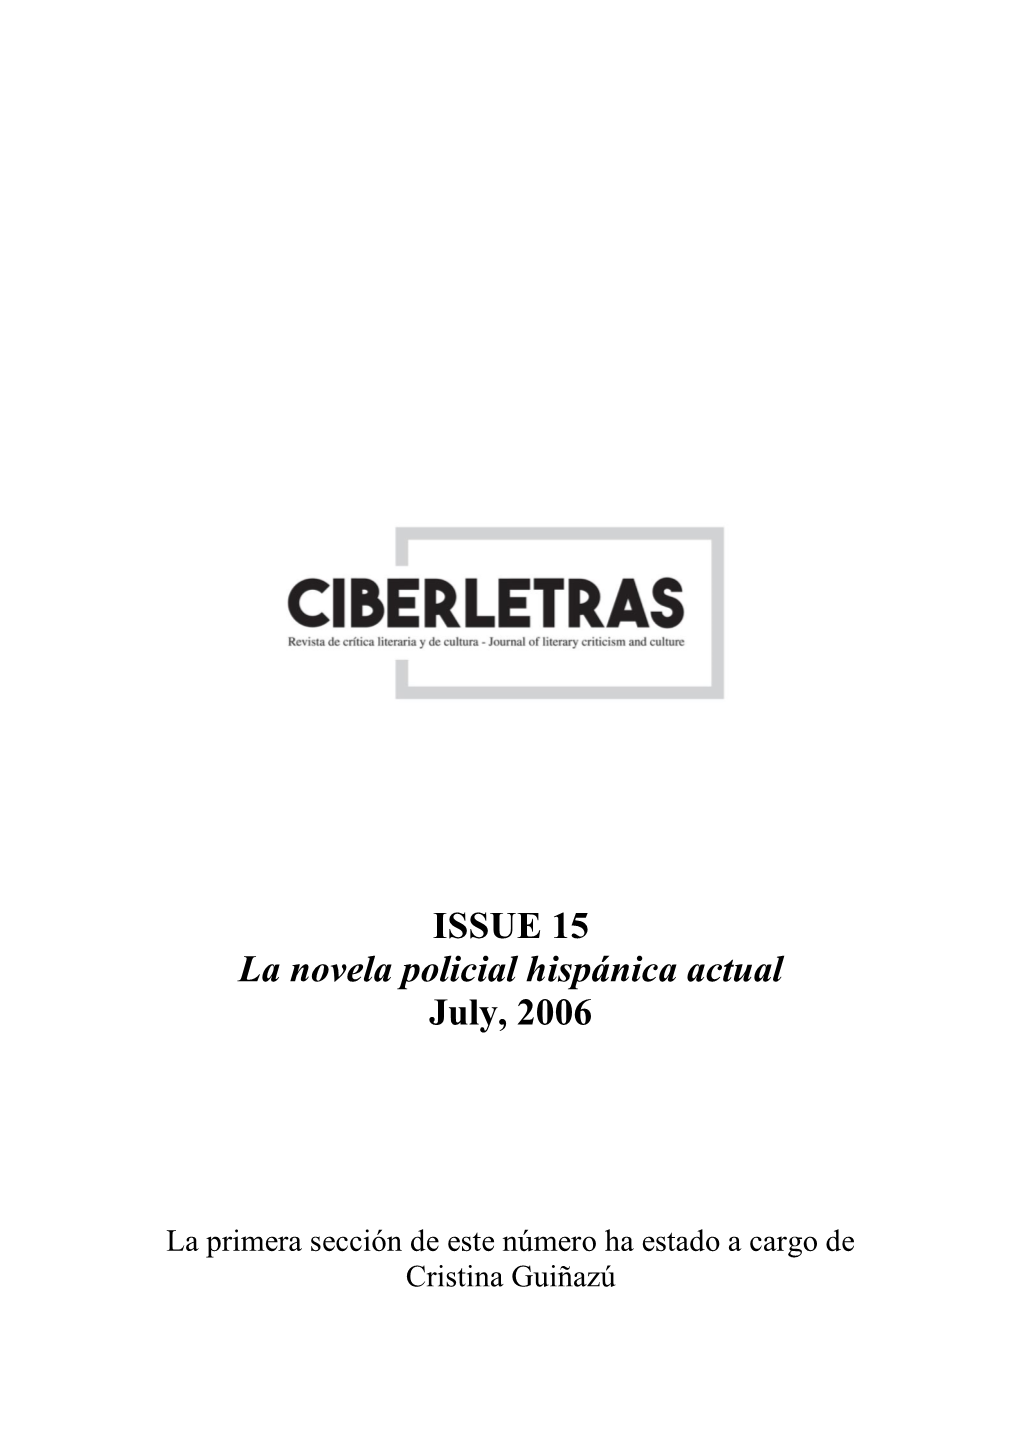 ISSUE 15 La Novela Policial Hispánica Actual July, 2006